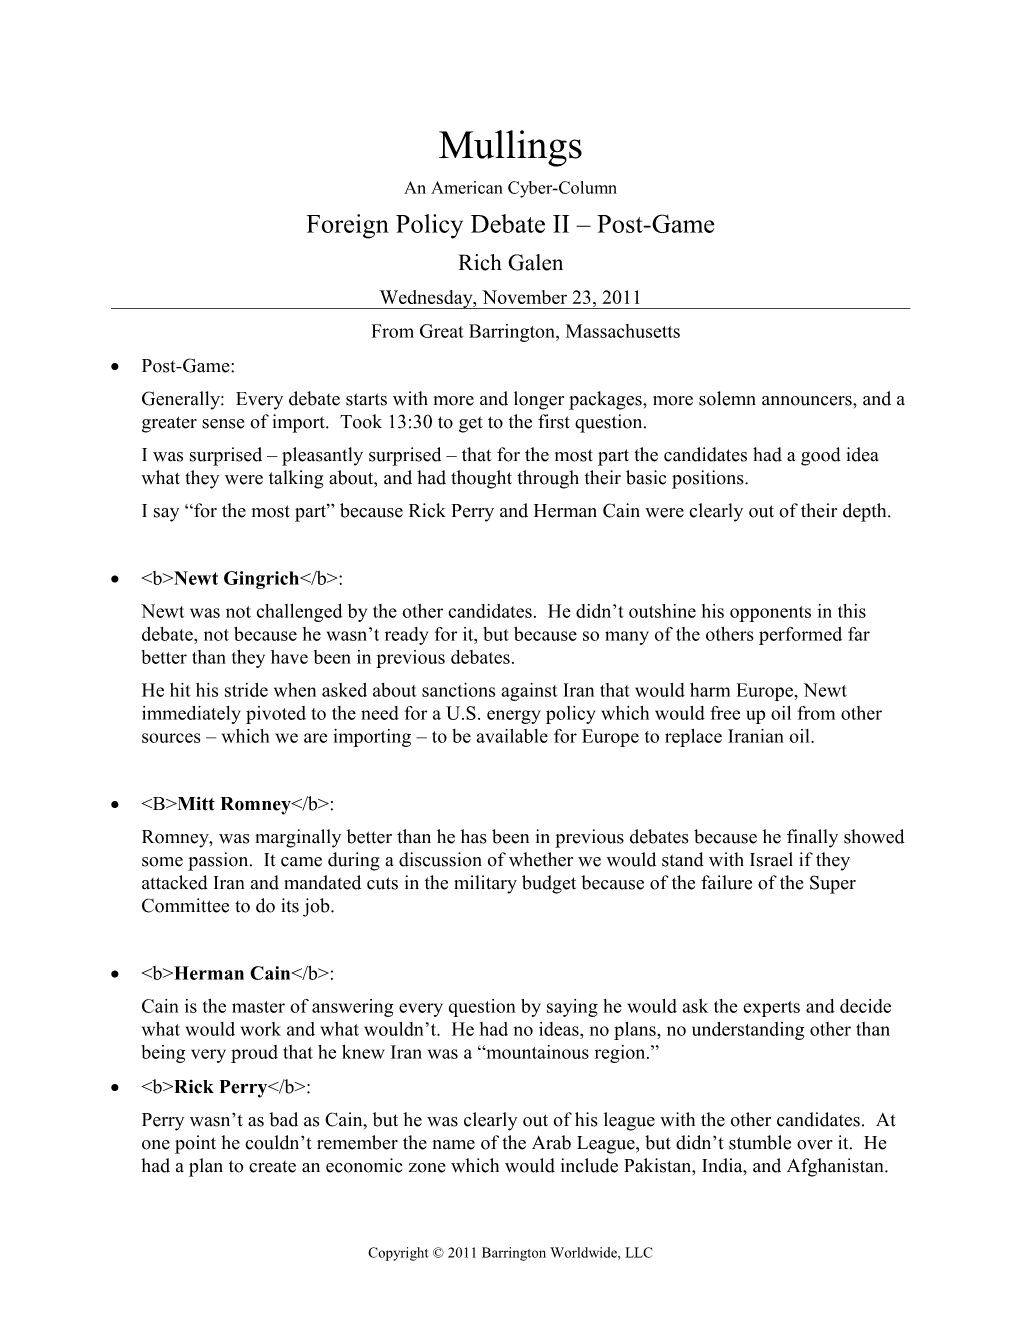 Foreign Policy Debate II Post-Game